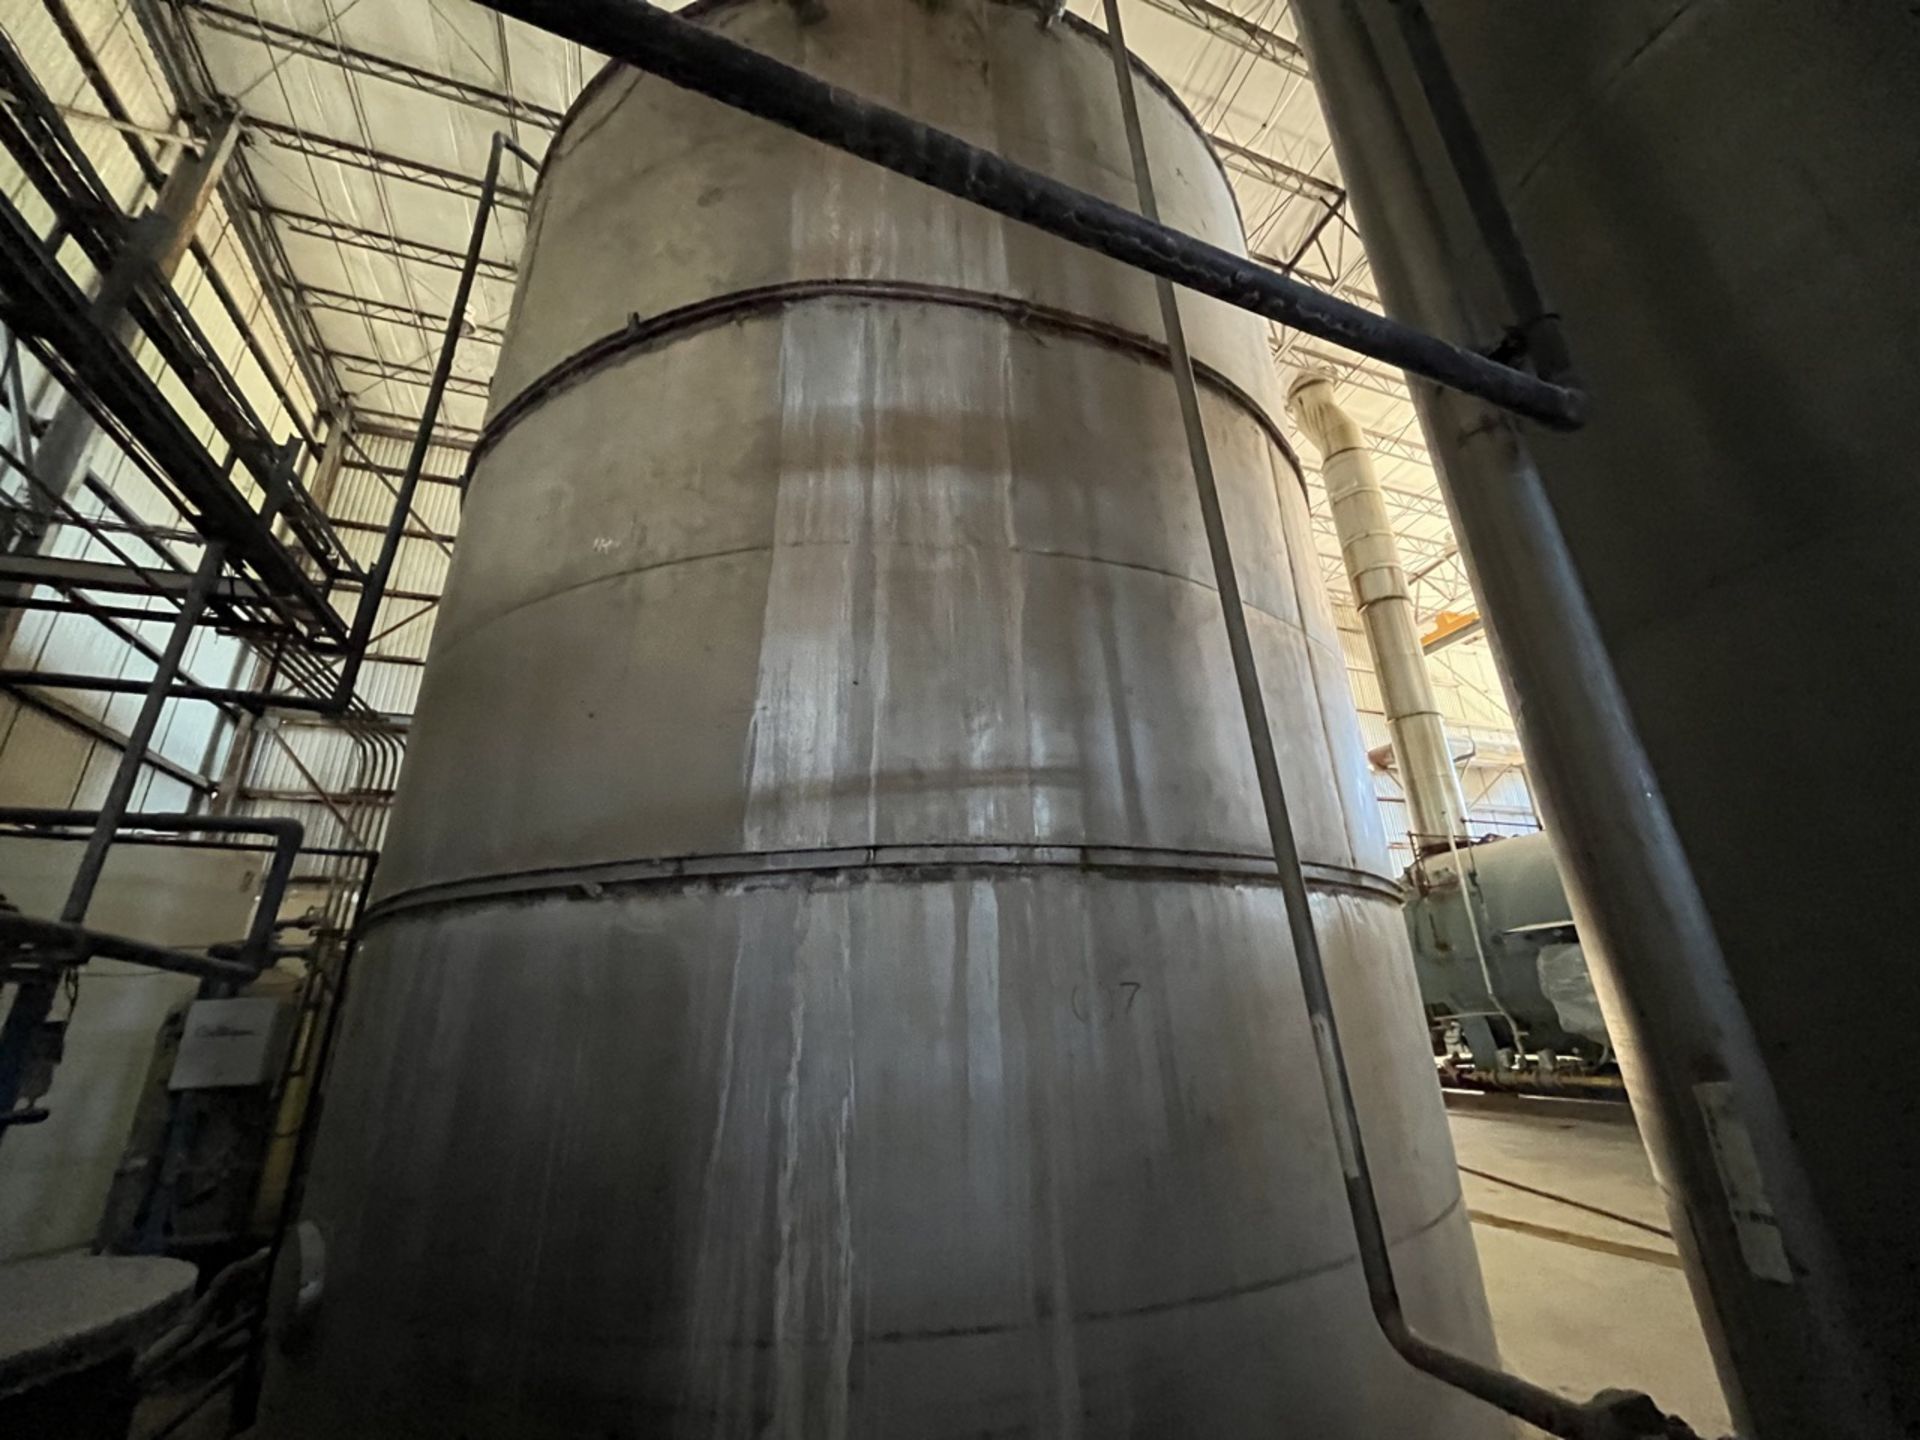 Stainless steel storage tank with a capacity of 192,163 liters, measuring approximately 6 meters in - Bild 6 aus 9